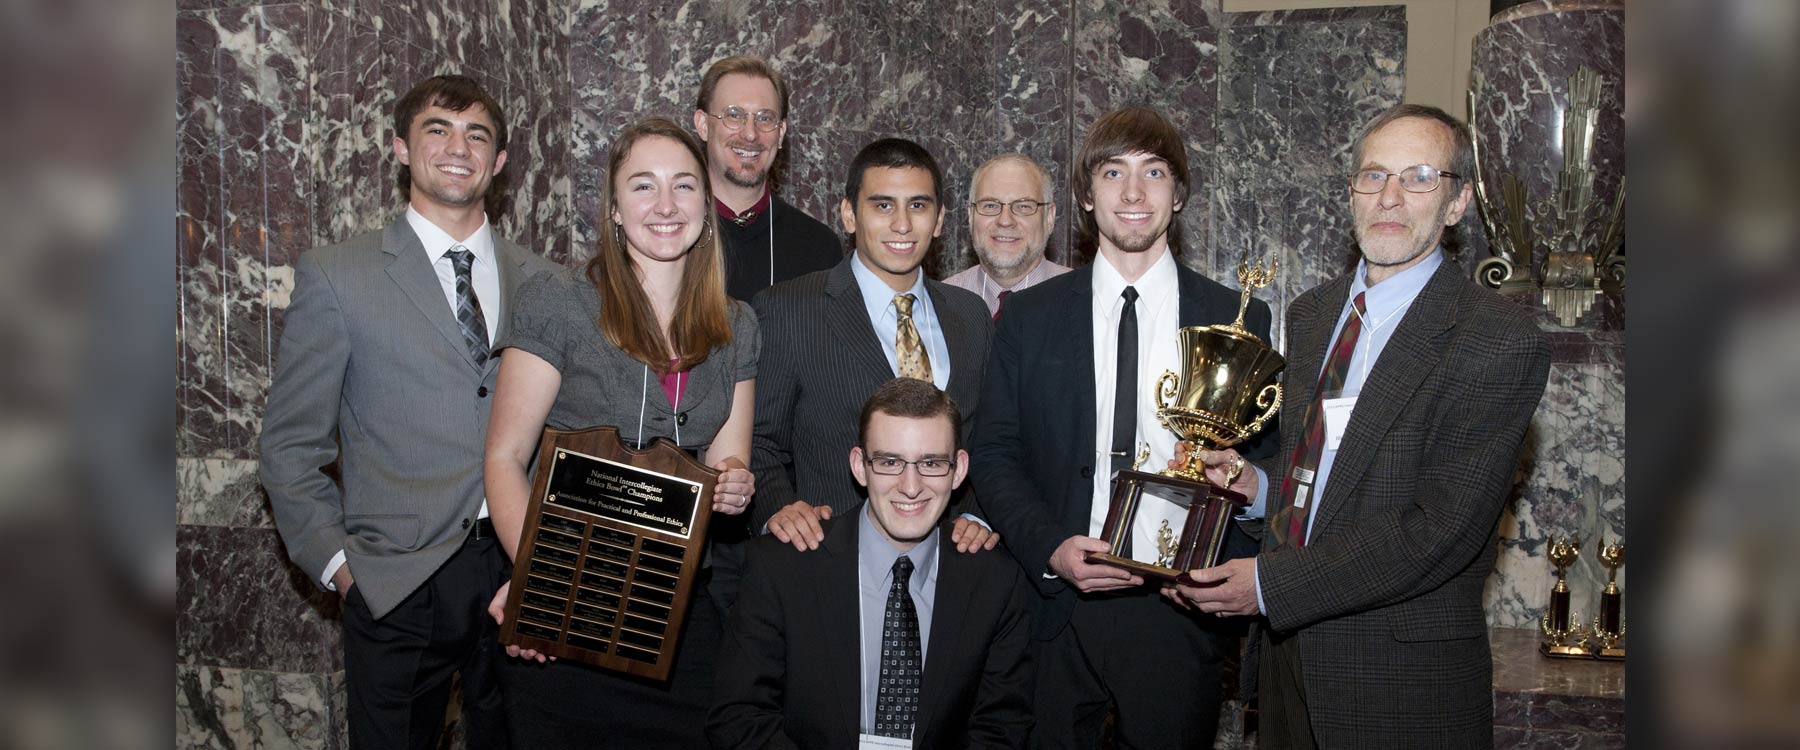 Forensics students and coaches pose for a group photo. Two students hold up a trophy and plaque.